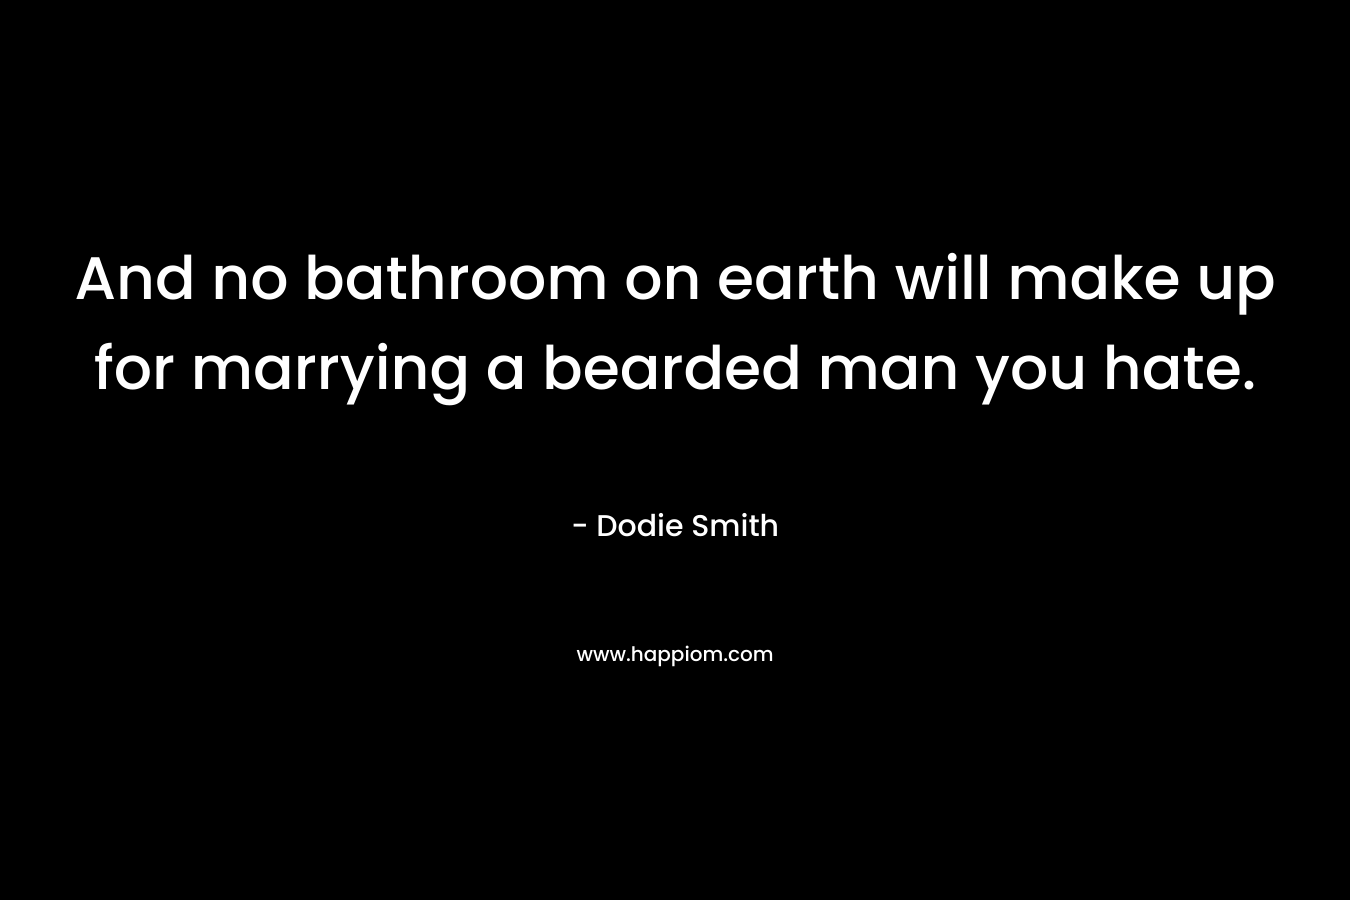 And no bathroom on earth will make up for marrying a bearded man you hate. – Dodie Smith